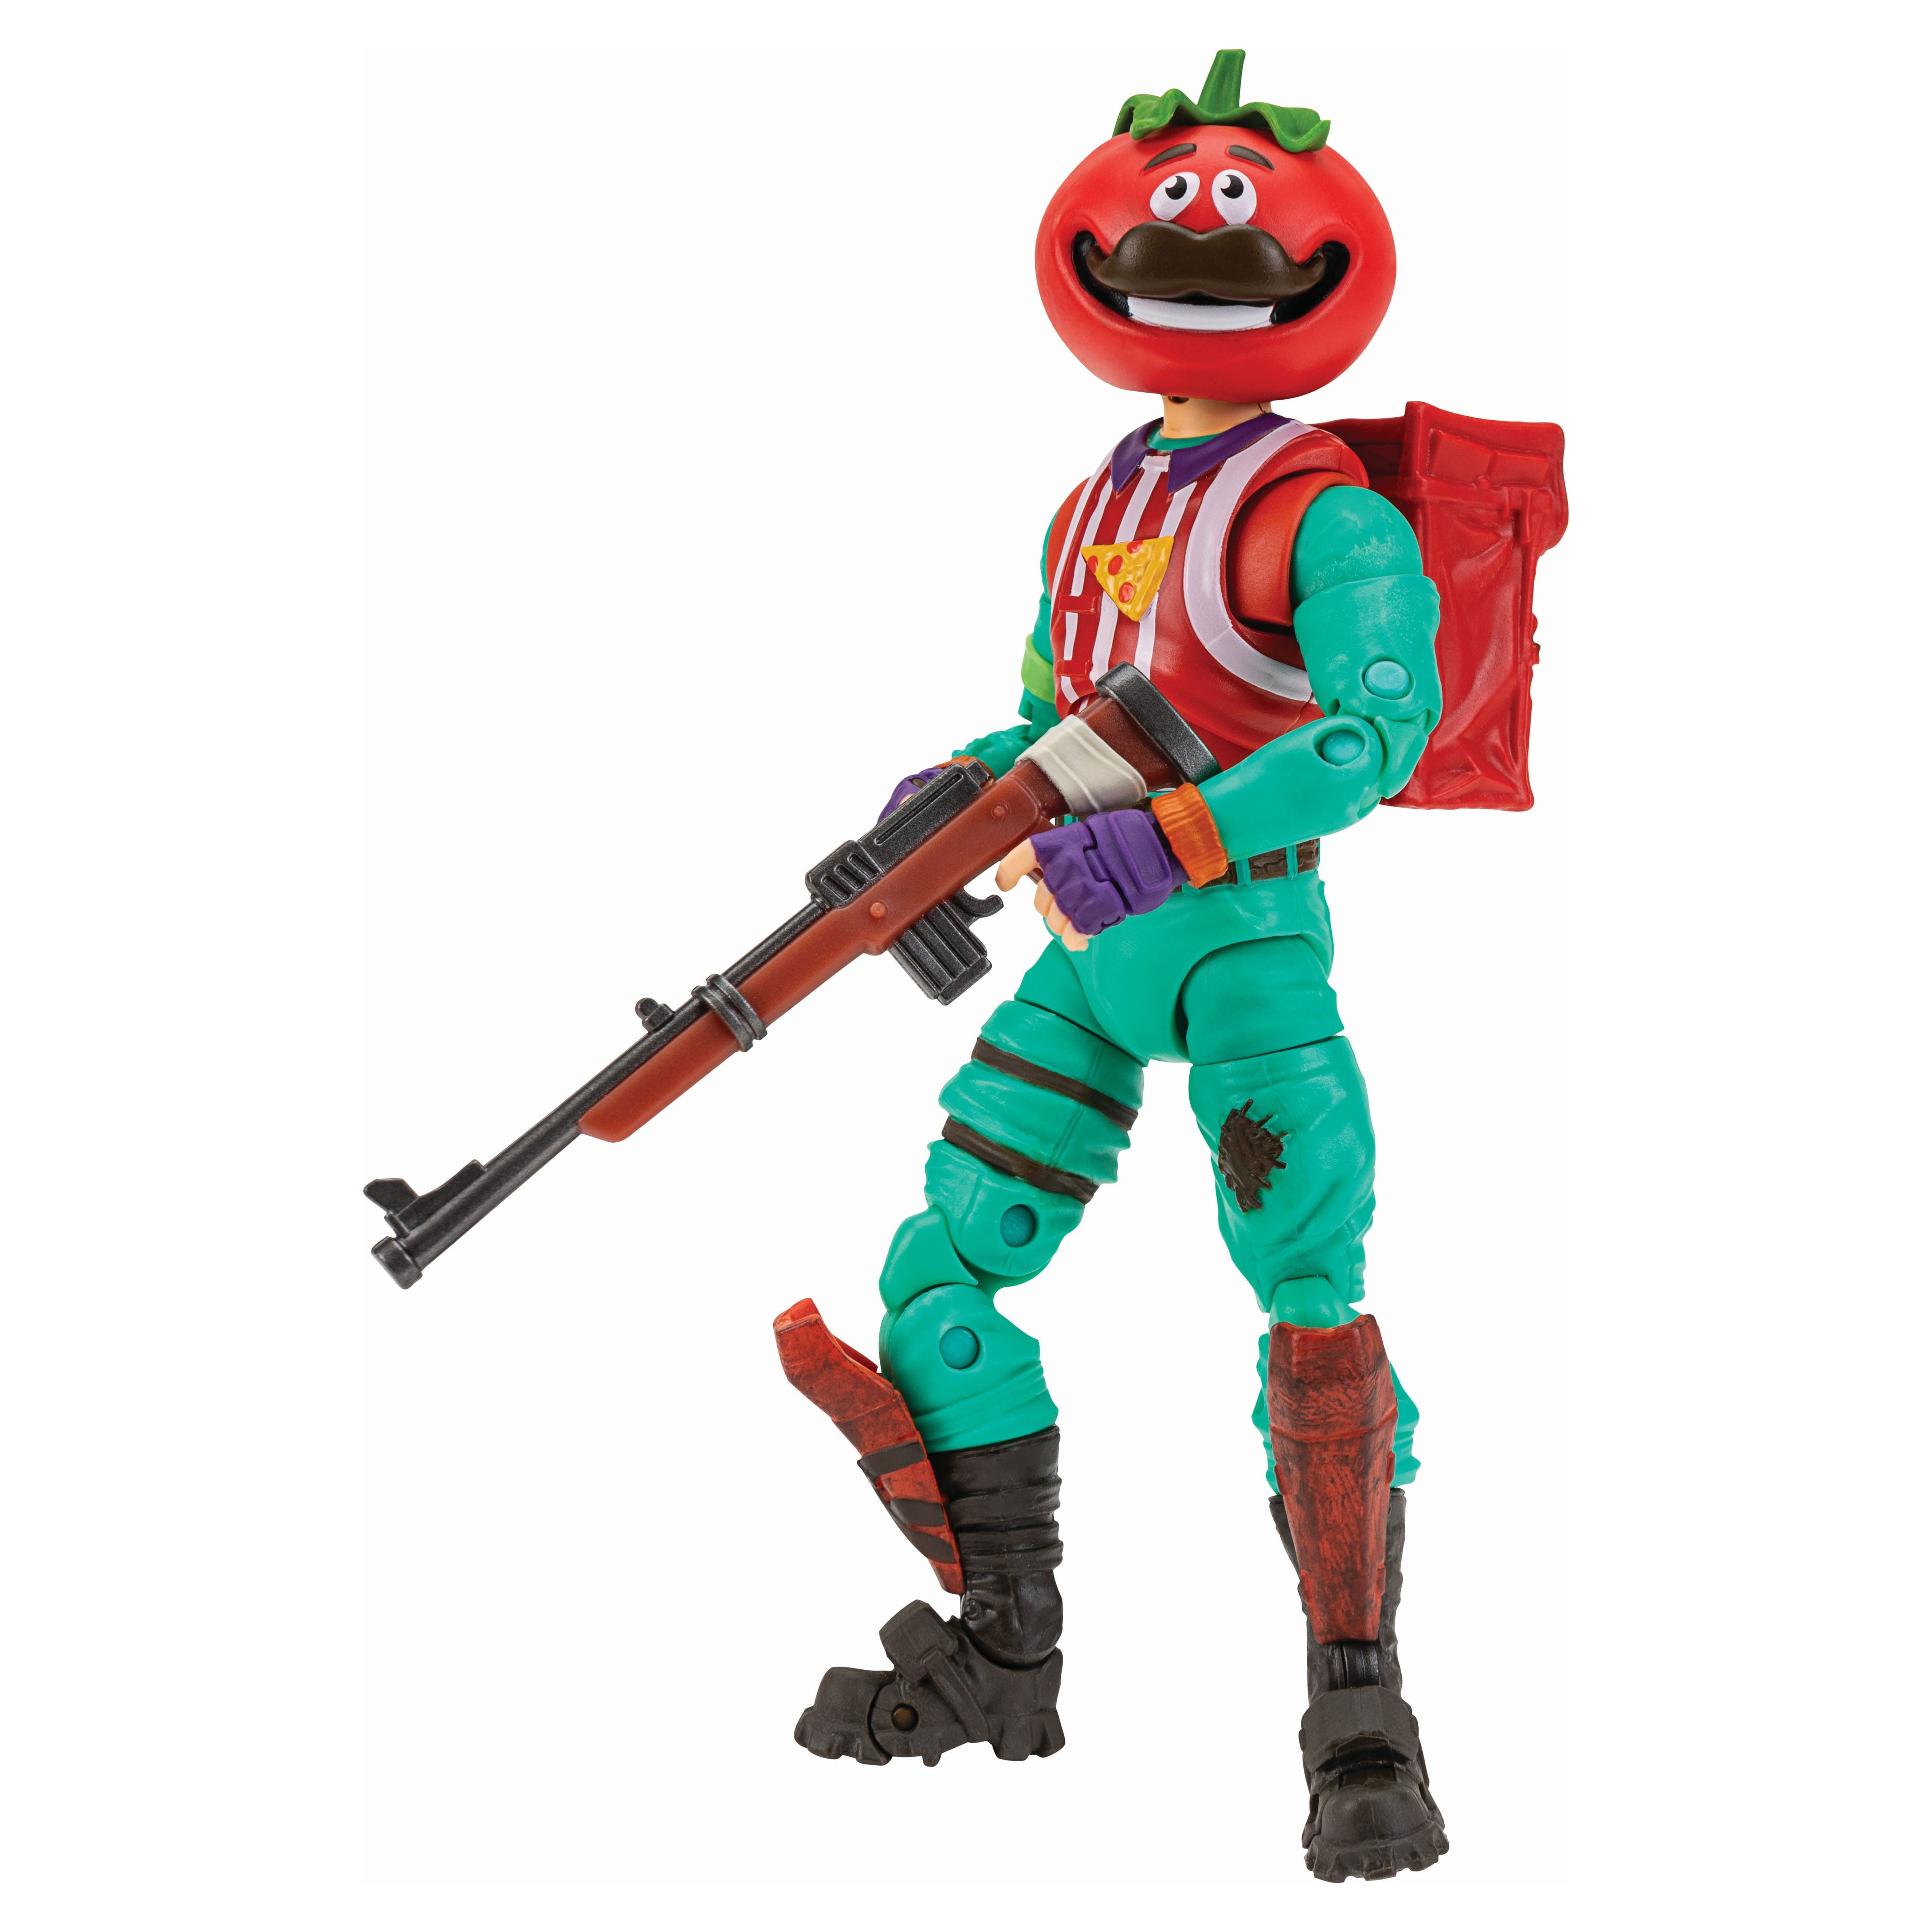 Fortnite FNT0084 Victory Series Tomatohead Figurines d'action, Jouets